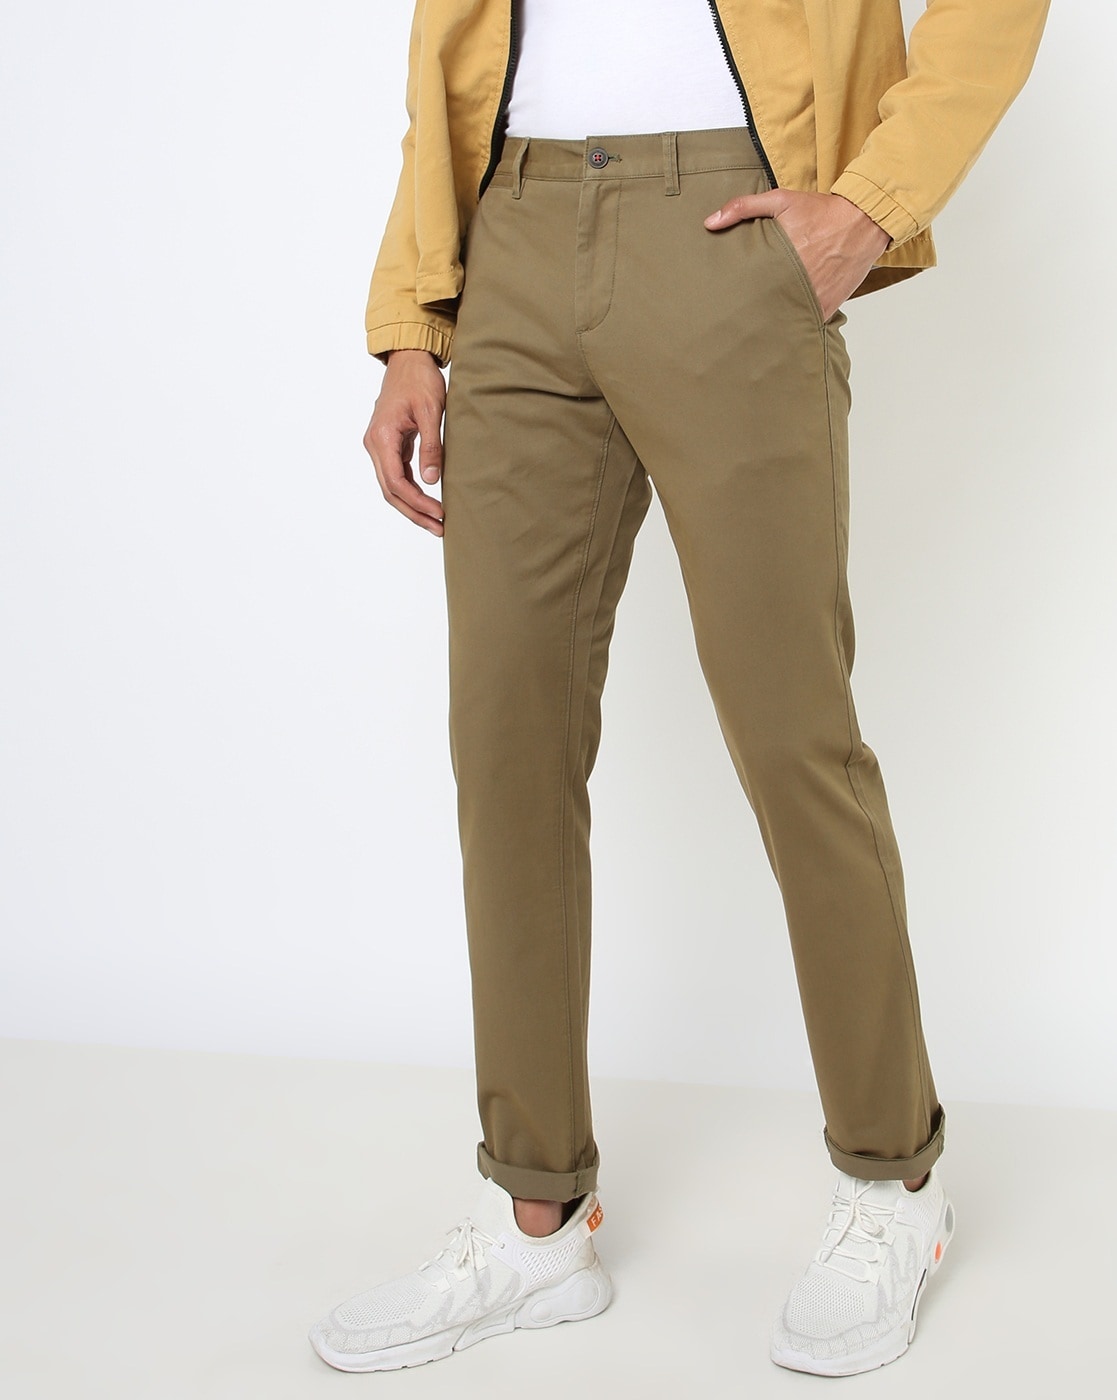 Elevate your look with trendy trousers